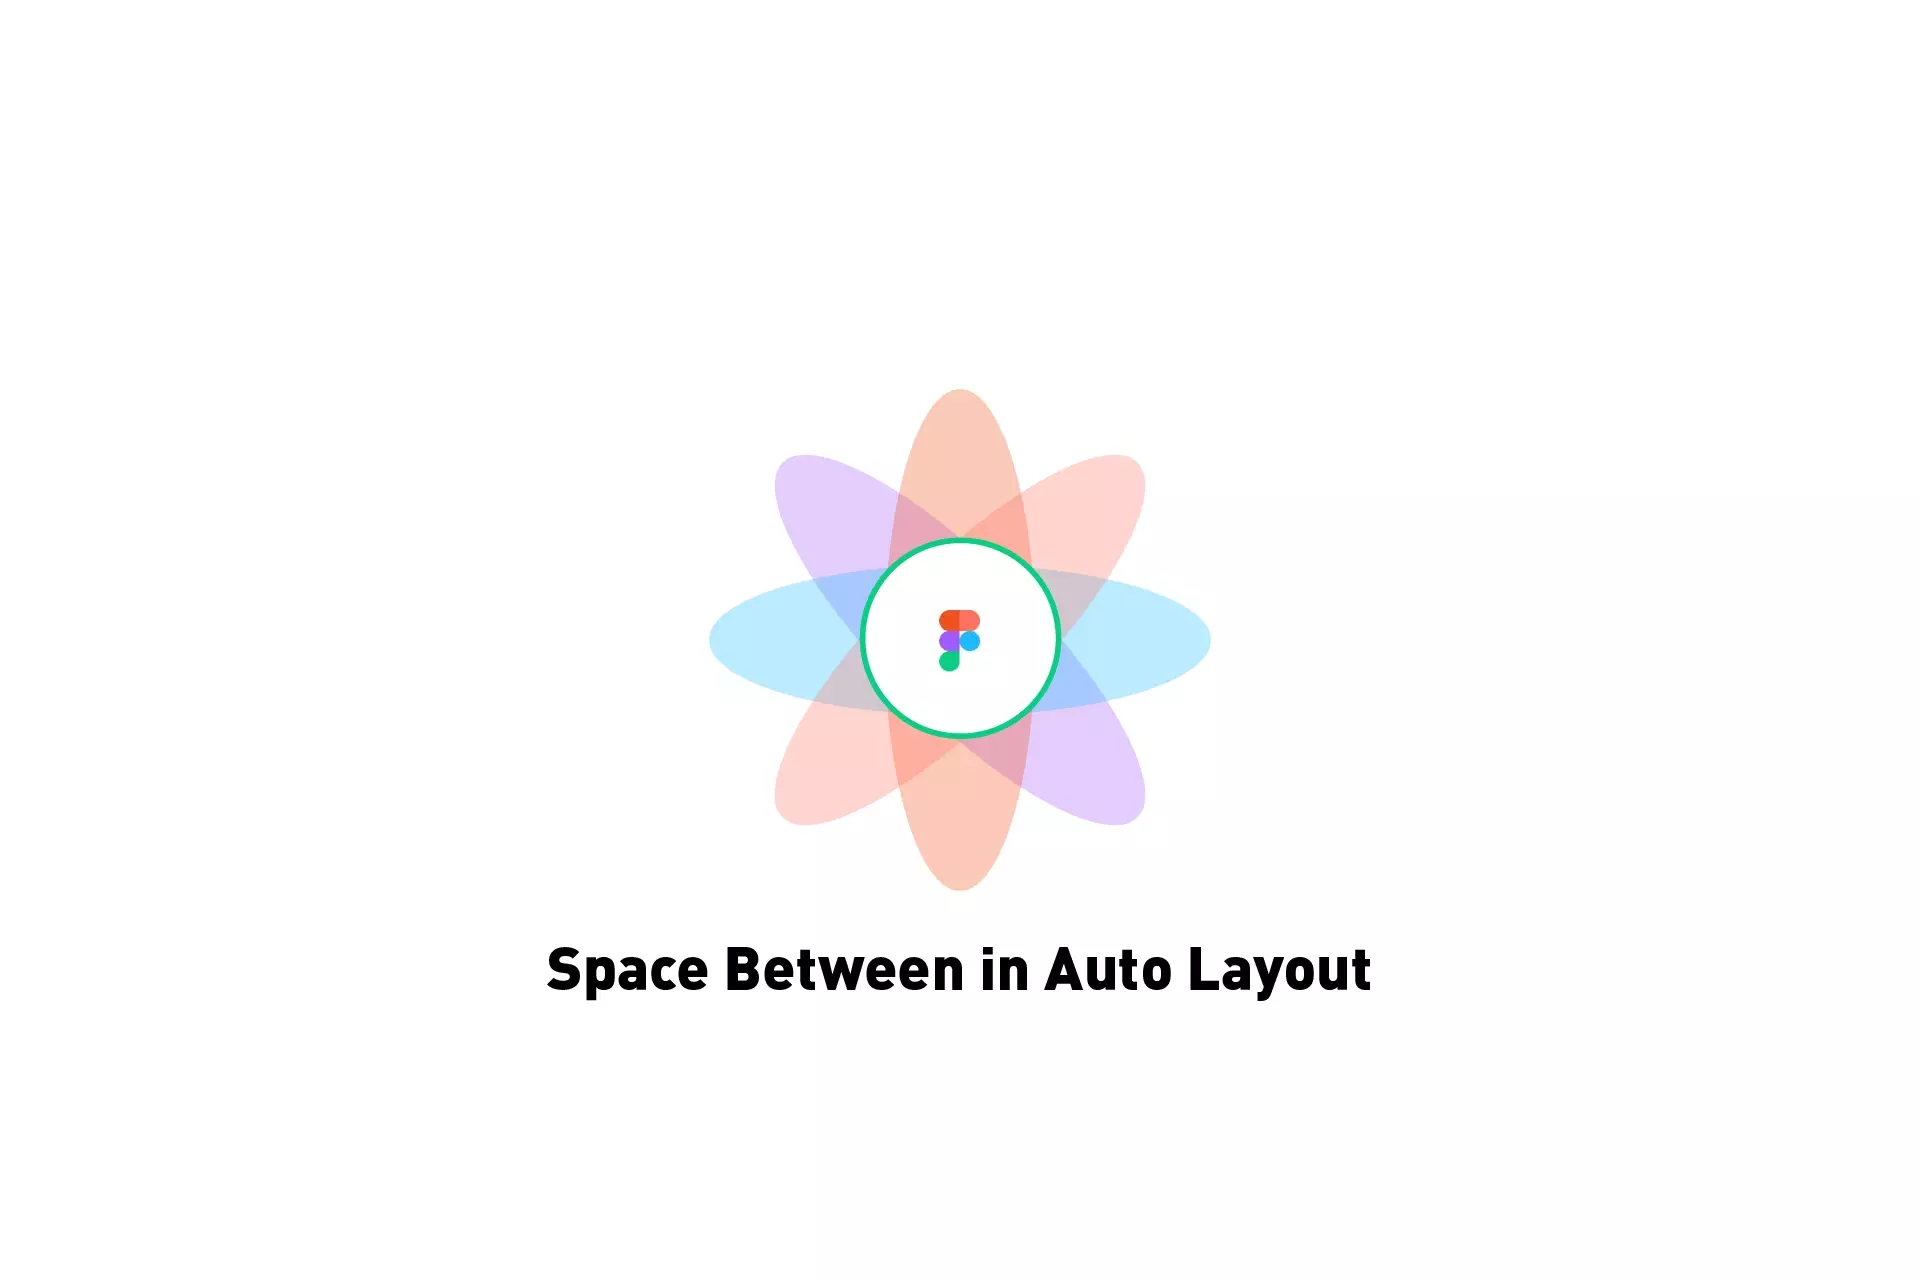 A flower that represents Figma with the text "Space between in Auto Layout" beneath it.